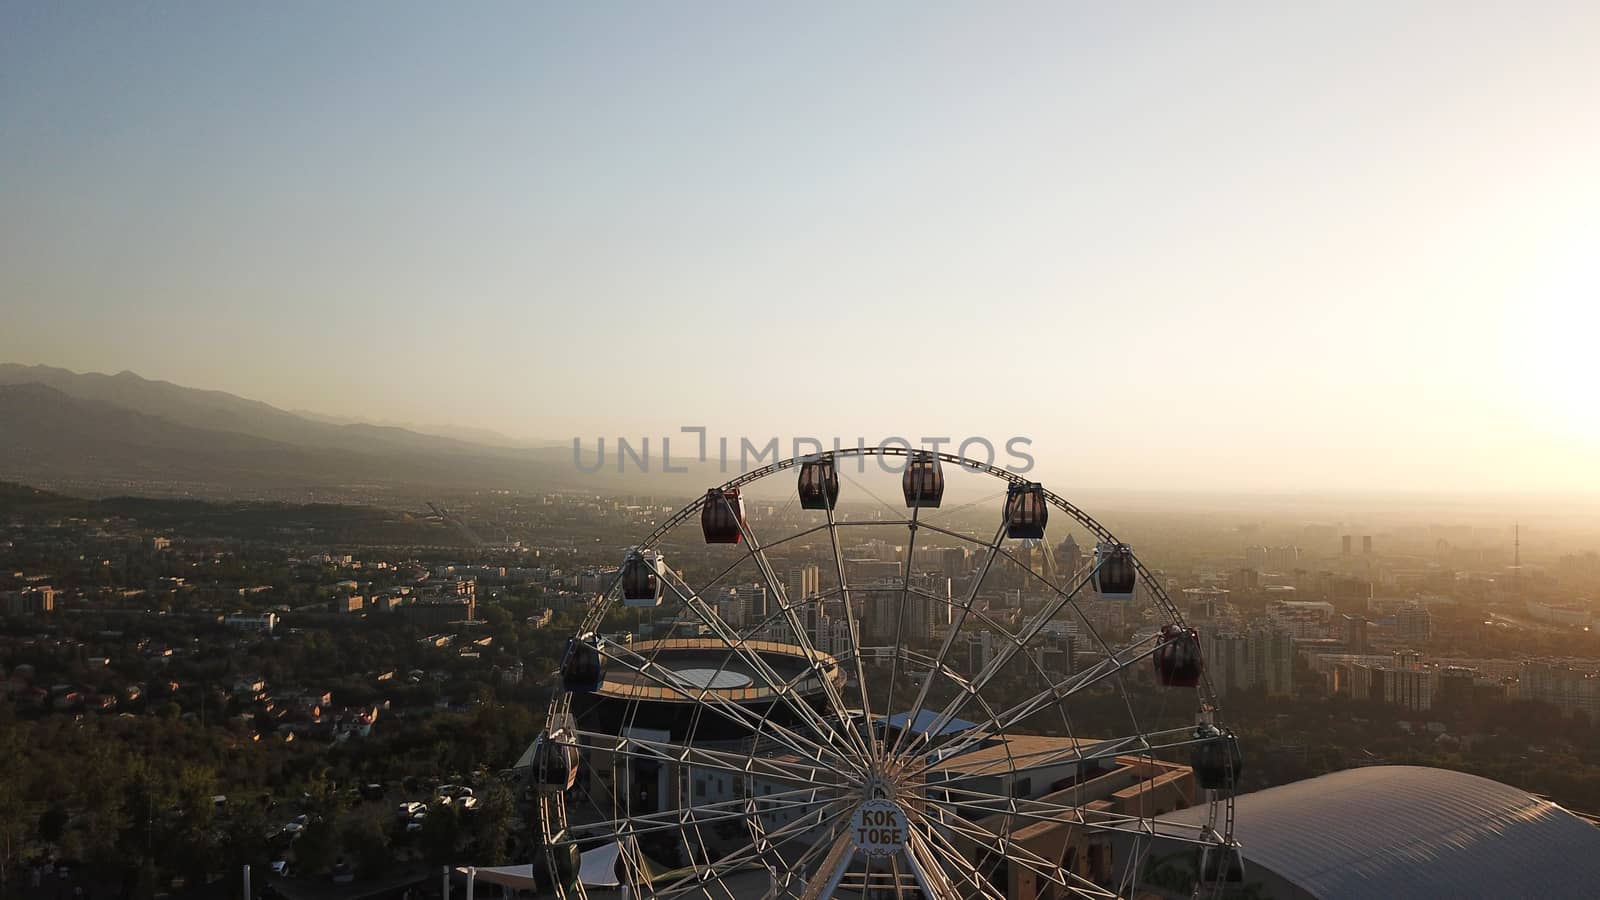 Ferris wheel on the green hill Kok Tobe at sunset by Passcal